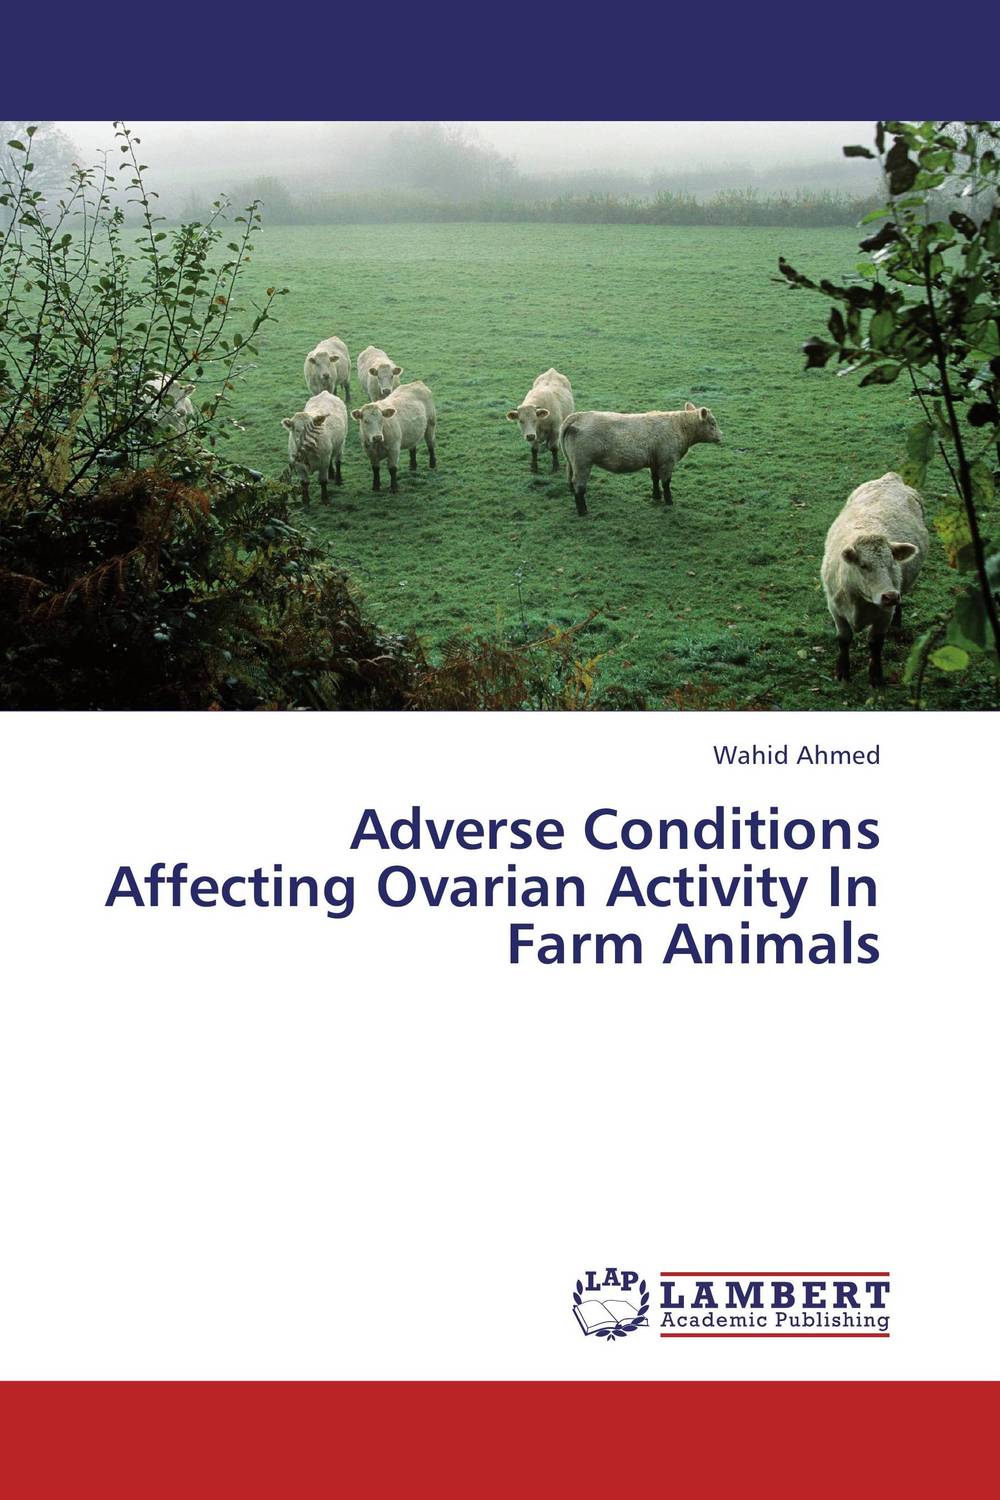 Adverse Conditions Affecting Ovarian Activity In Farm Animals